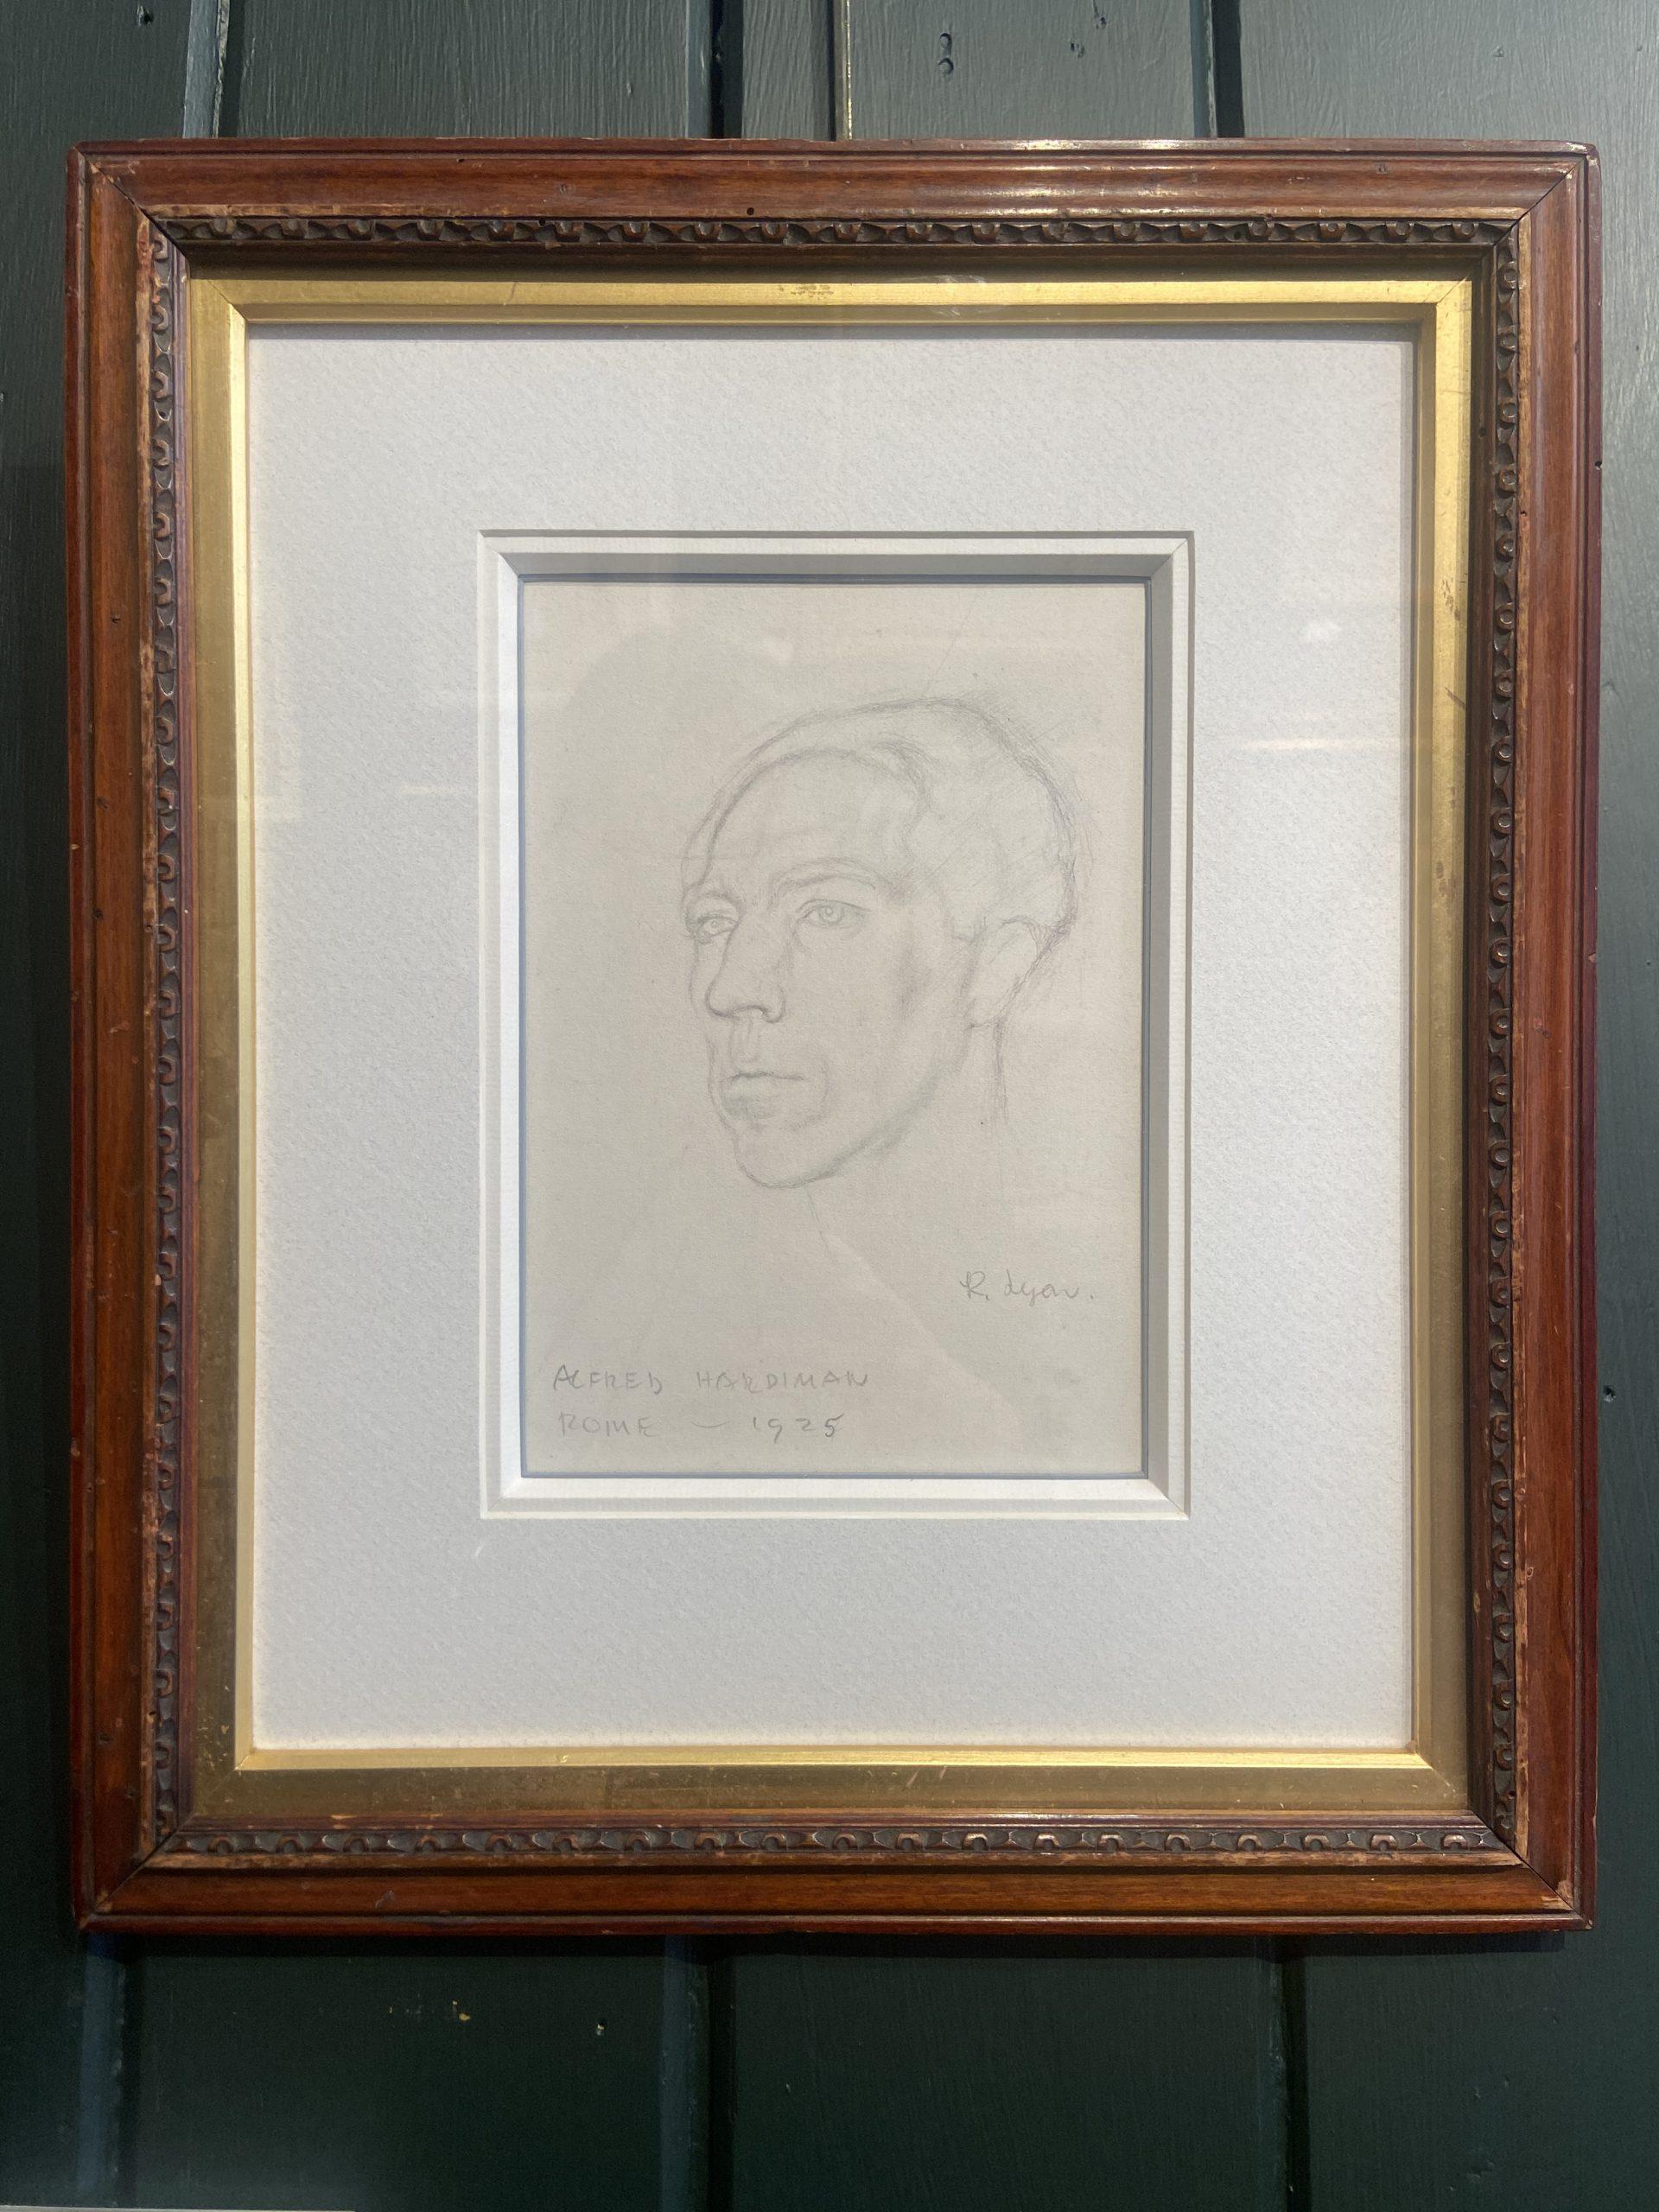 Portrait of Alfred Hardiman, Graphite Sketch, Signed and Dated 1925 - Modern Art by Robert Lyon